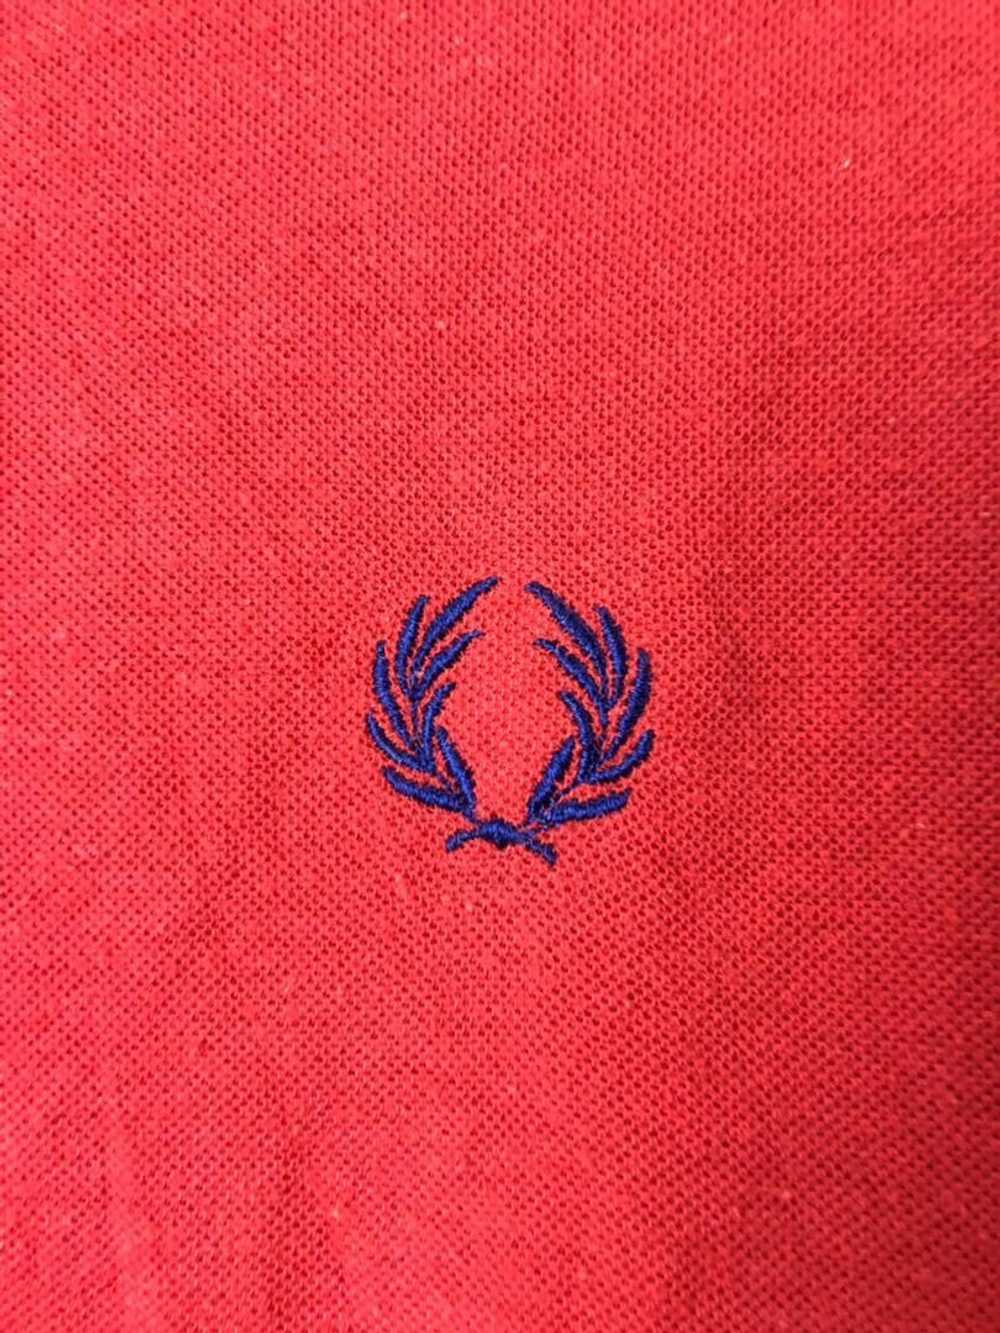 Fred Perry × Sportswear × Vintage Vintage Fred Pe… - image 6